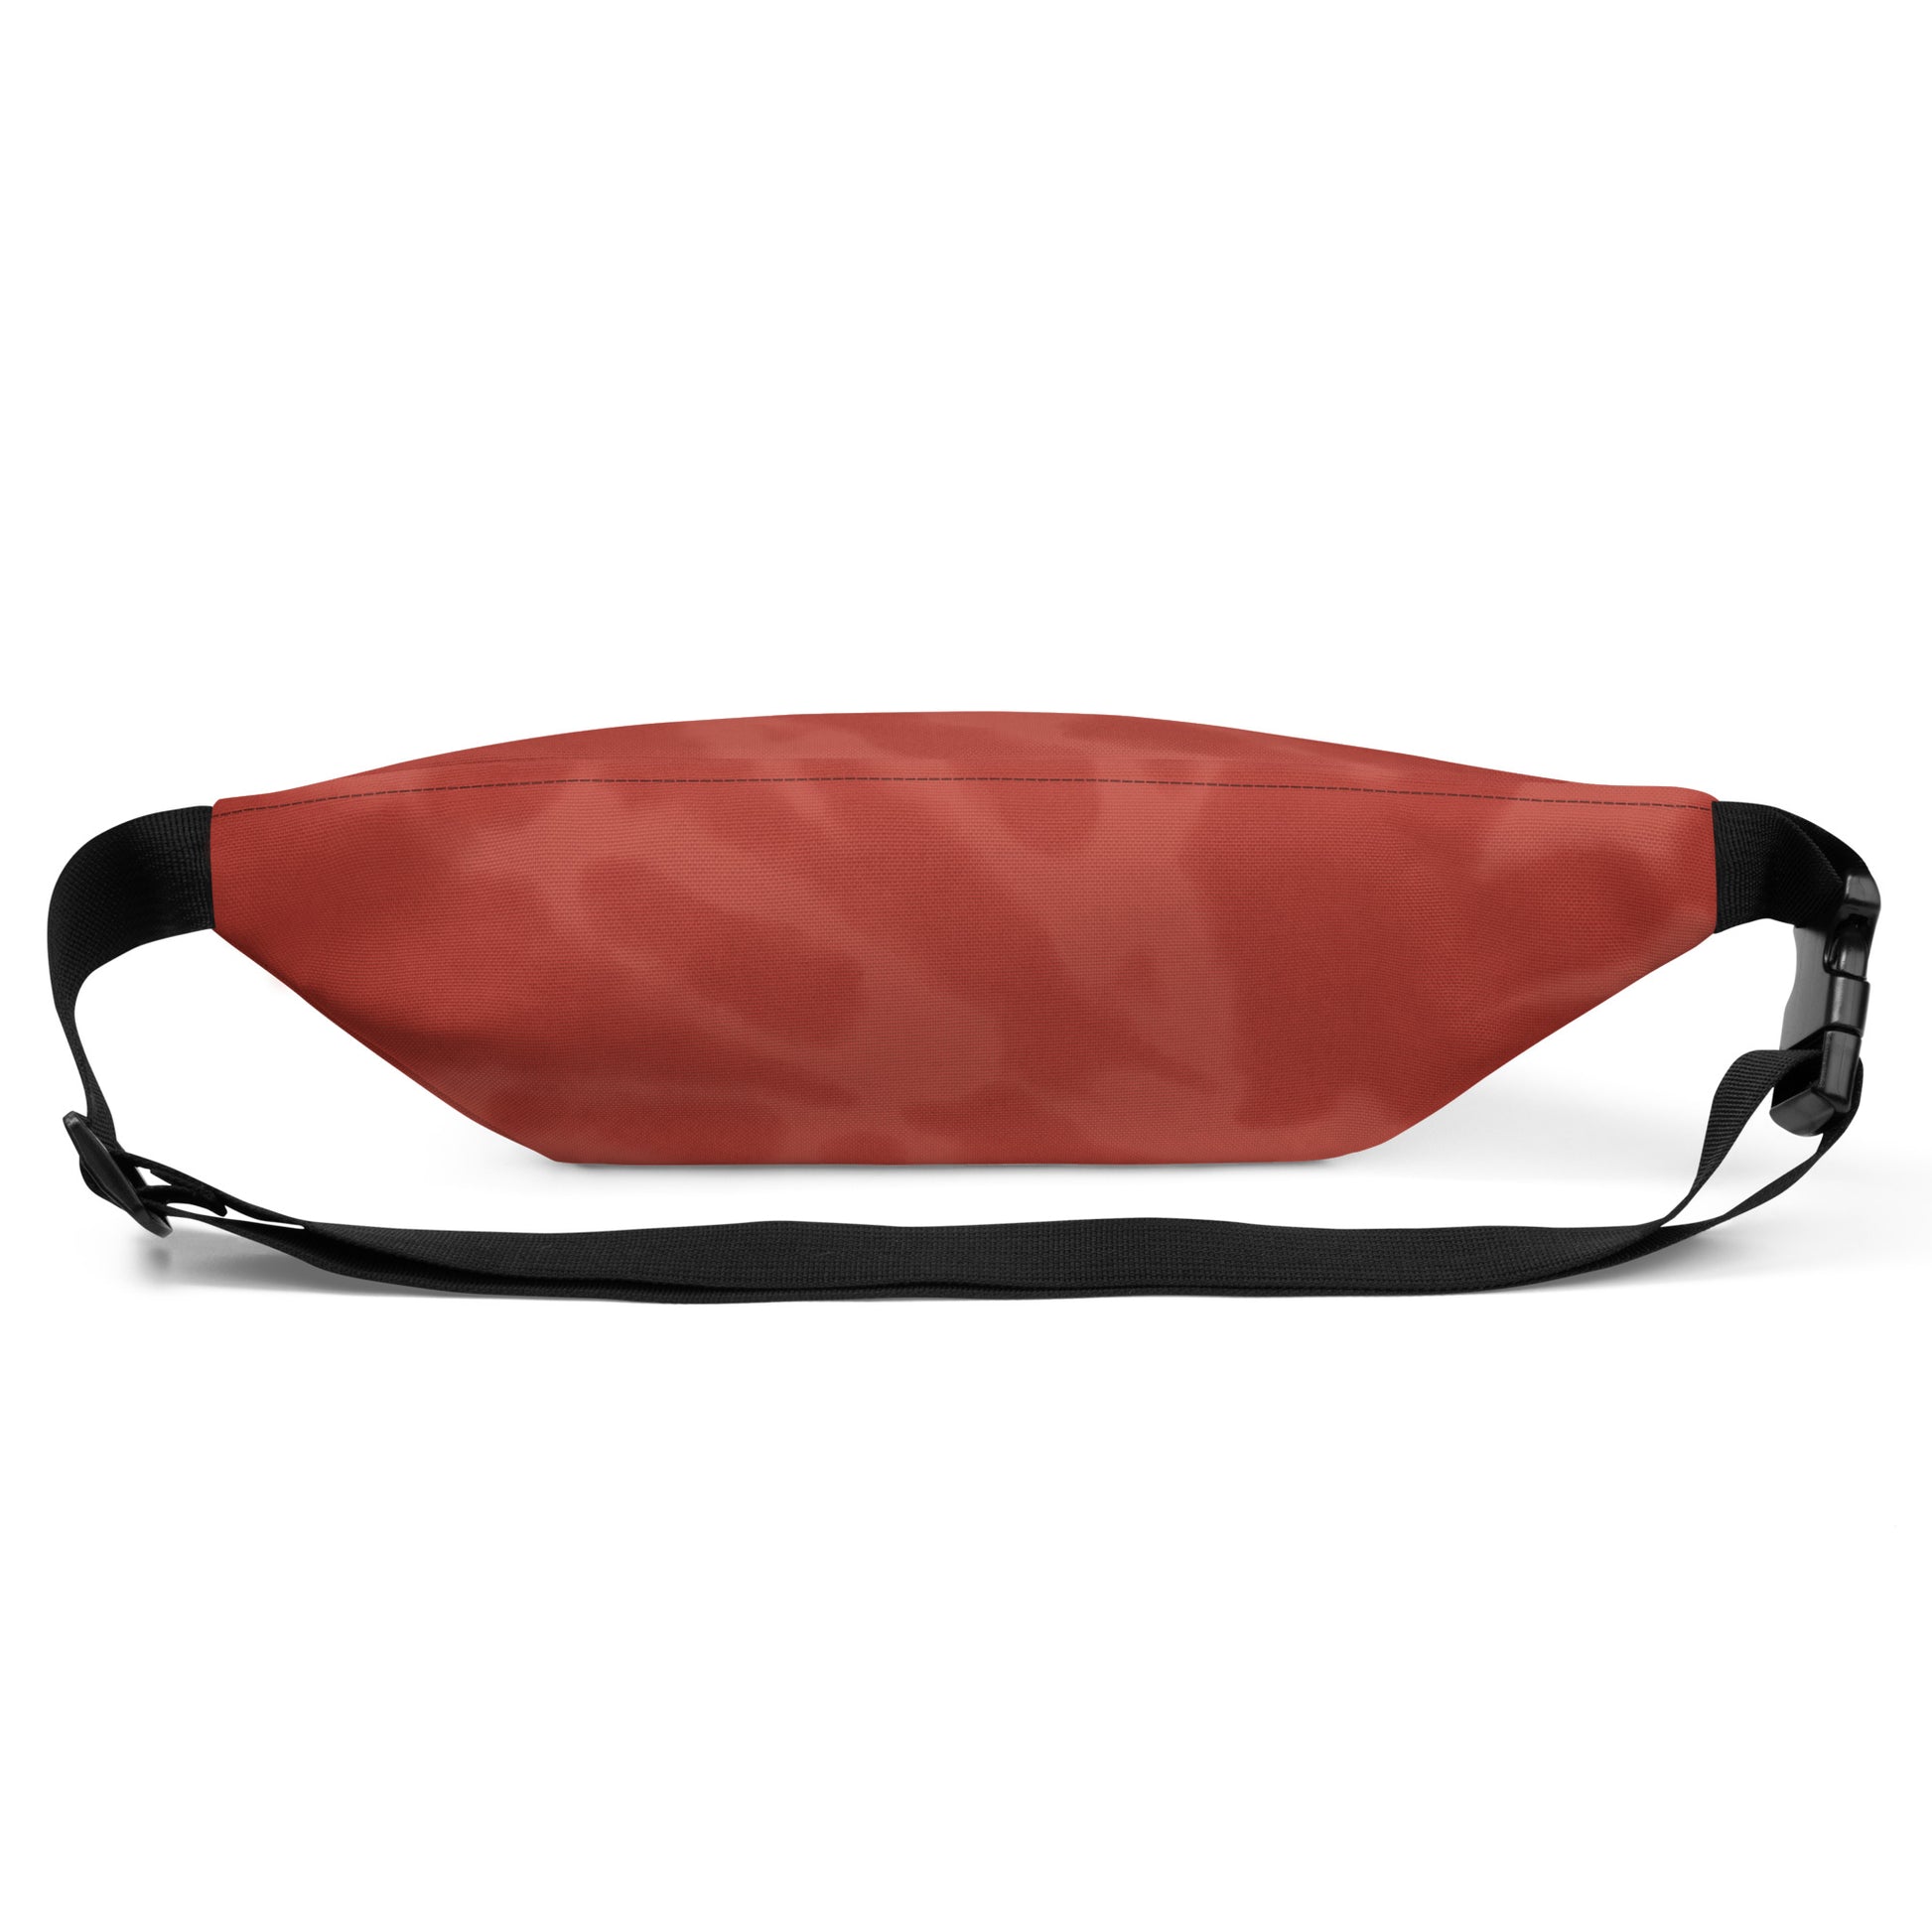 Travel Gift Fanny Pack - Red Tie-Dye • YQM Moncton • YHM Designs - Image 09